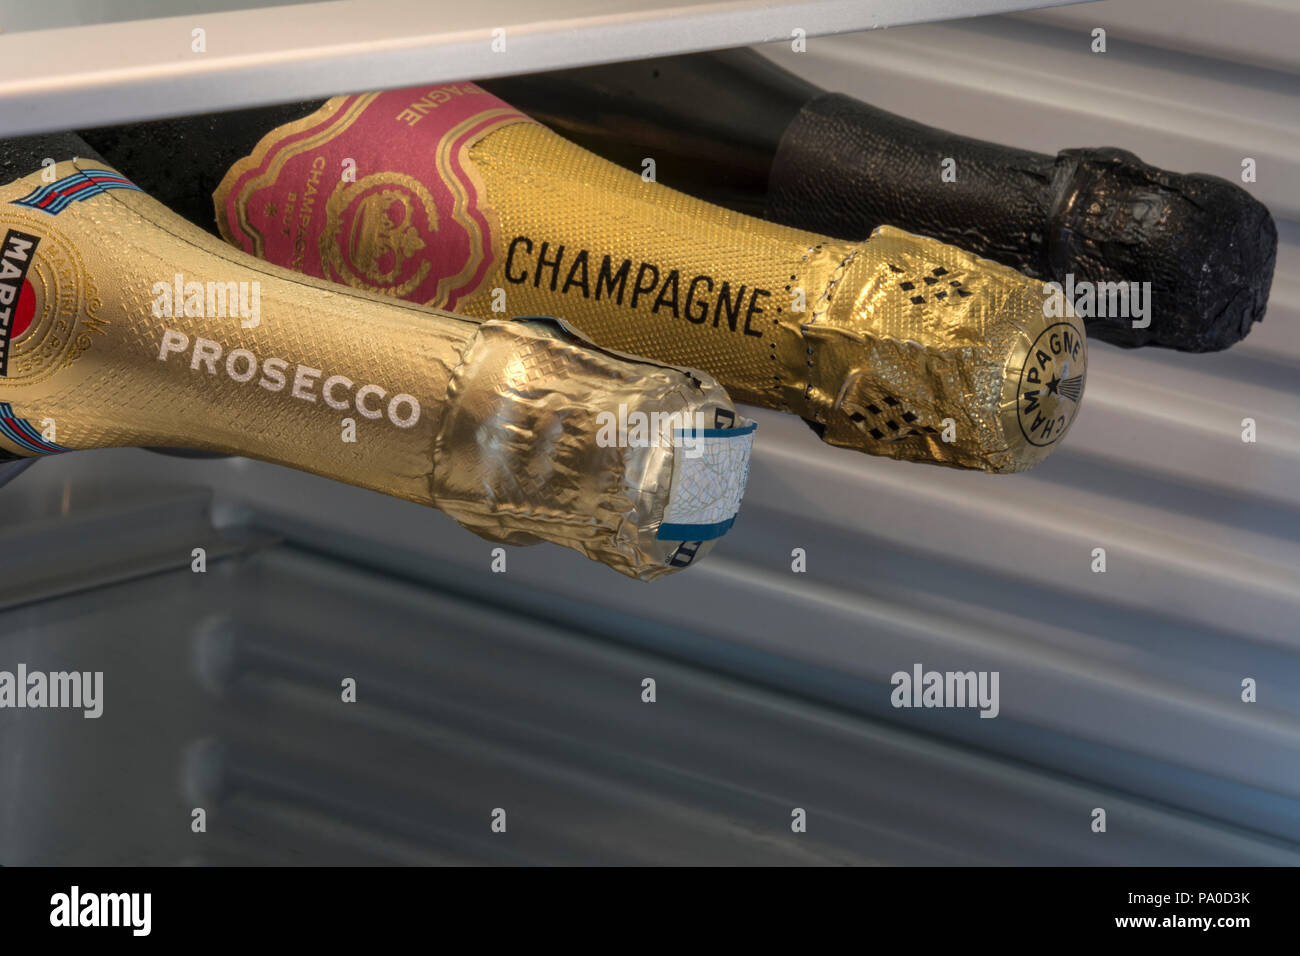 Prosecco and Champagne including Dom Perignon sparkling wine bottles stored horizontally in chilled temperature controlled wine cabinet refrigerator Stock Photo